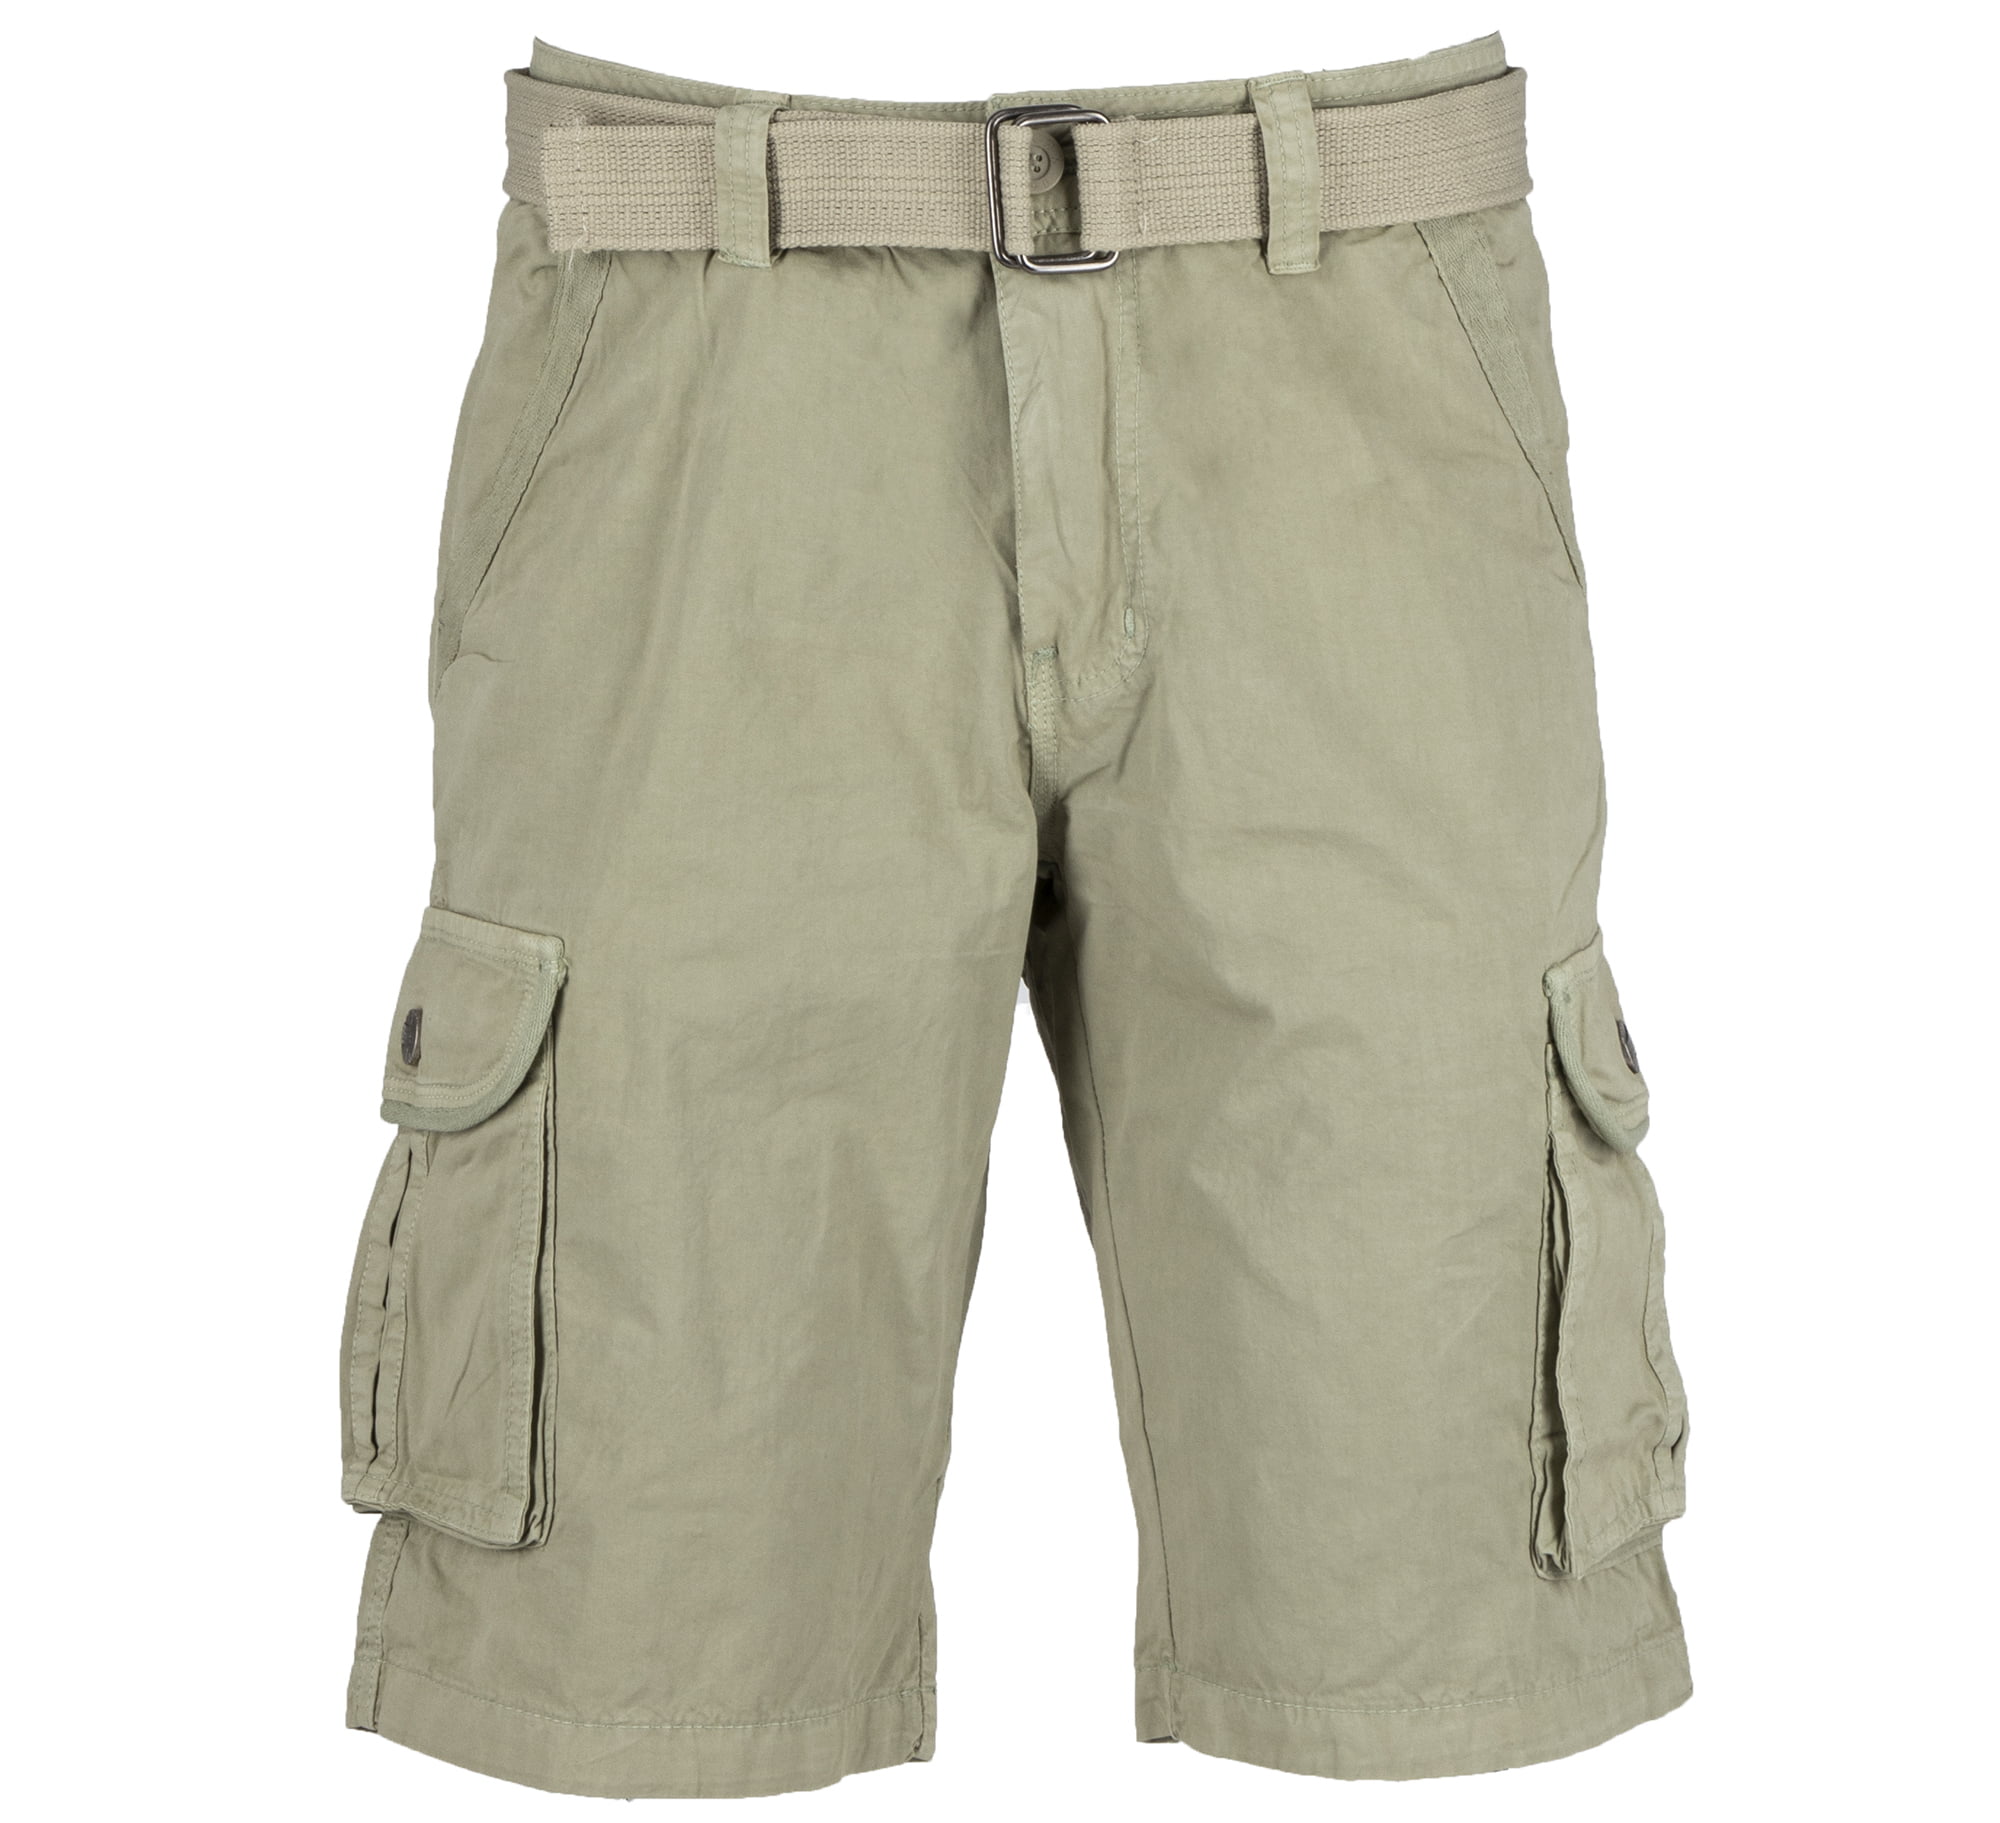 RAW X Mens Belted Cargo Shorts Relaxed Fit Casual Tactical Knee Length Cargo Shorts for Men 